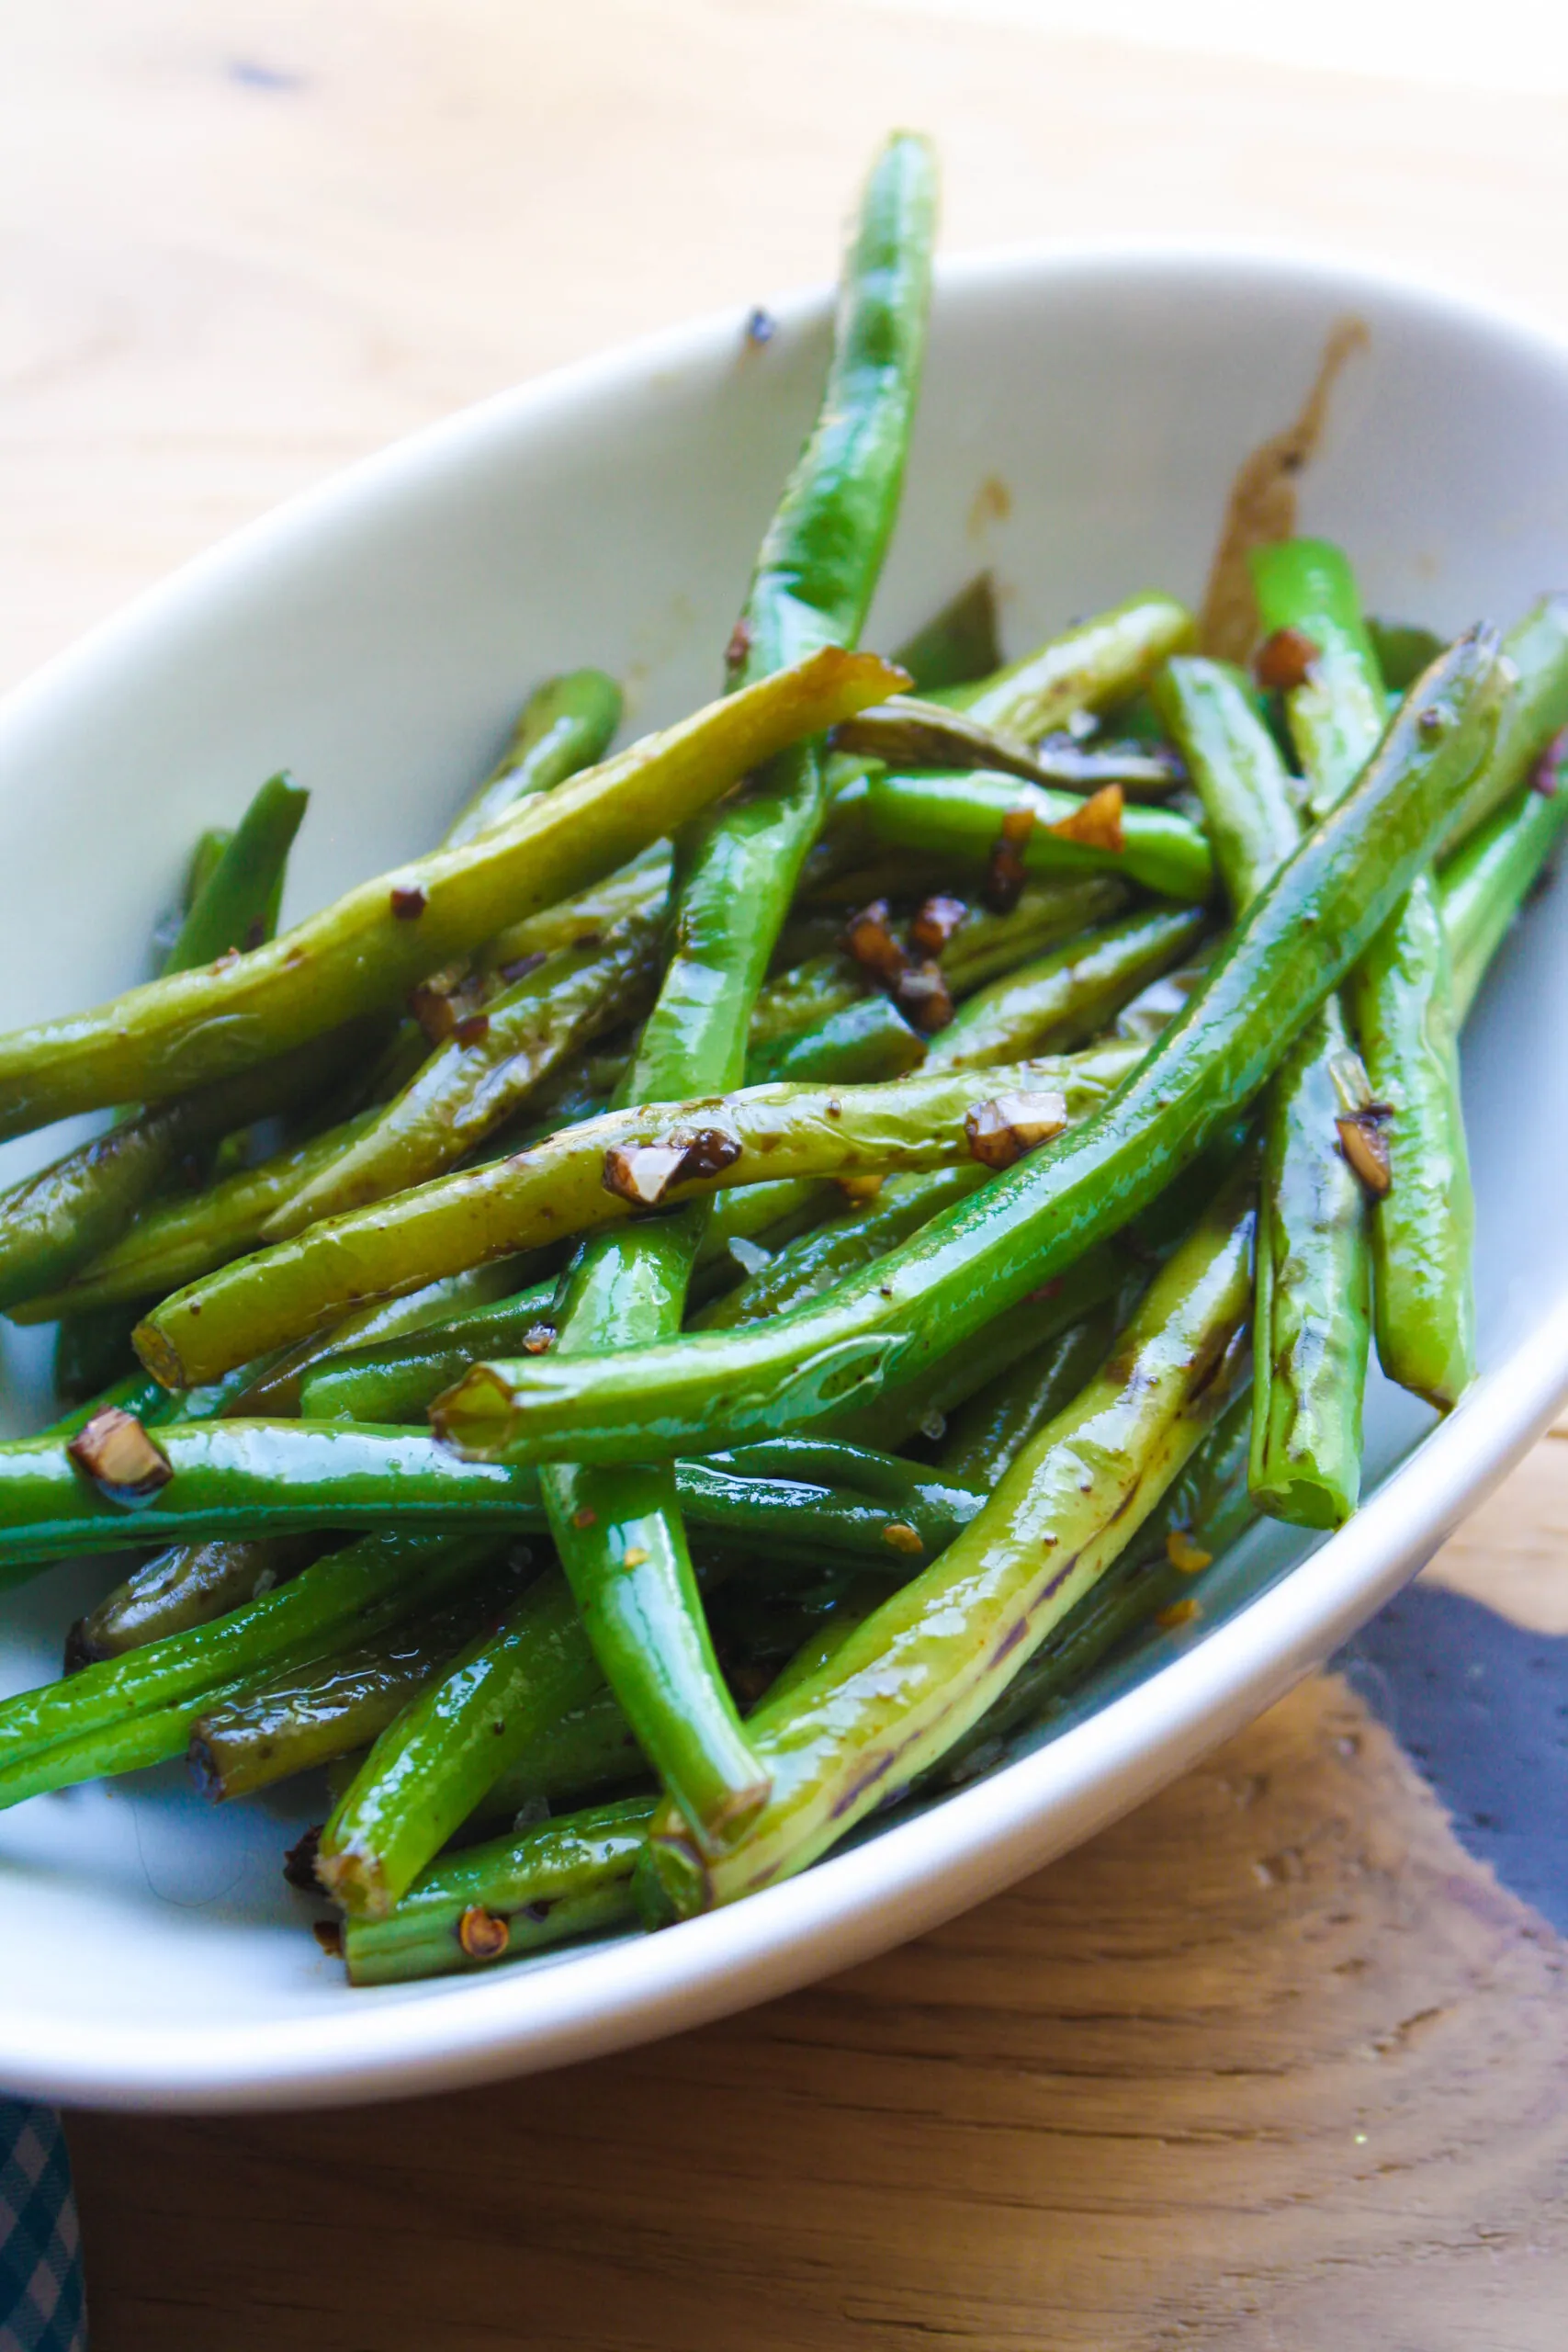 Balsamic Green Beans is a fab side dish, especially when you use seasonally fresh green beans. This side dish is quick and easy to make!